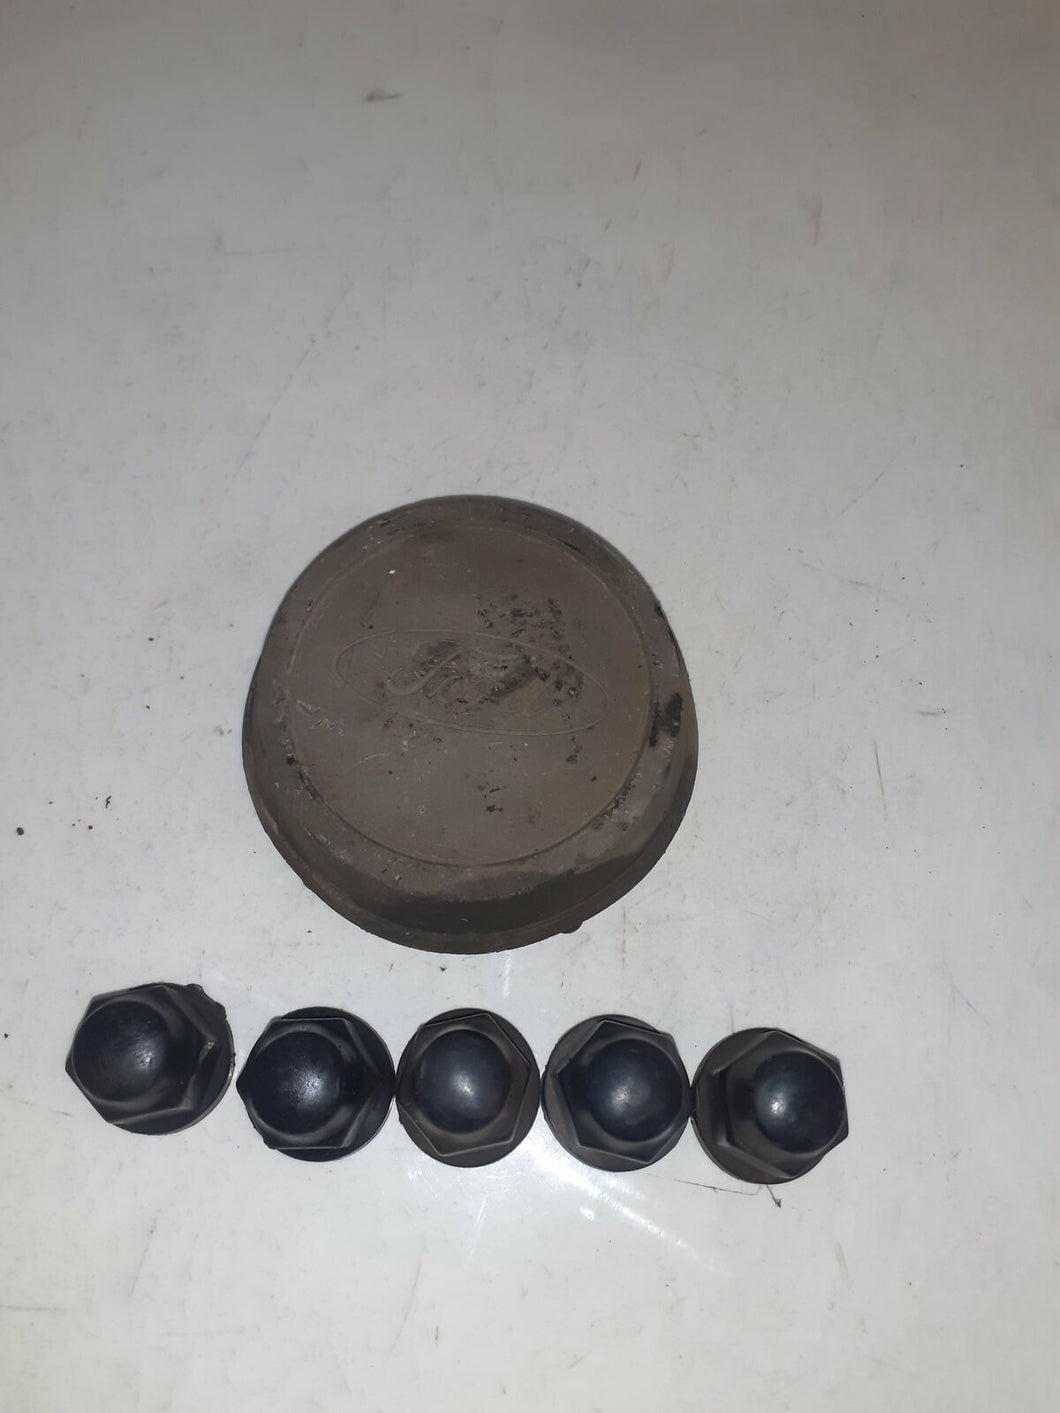 Ford Transit 2.4 RWD MK6 2000 - 2006 Center Cap And Wheel Nut Covers